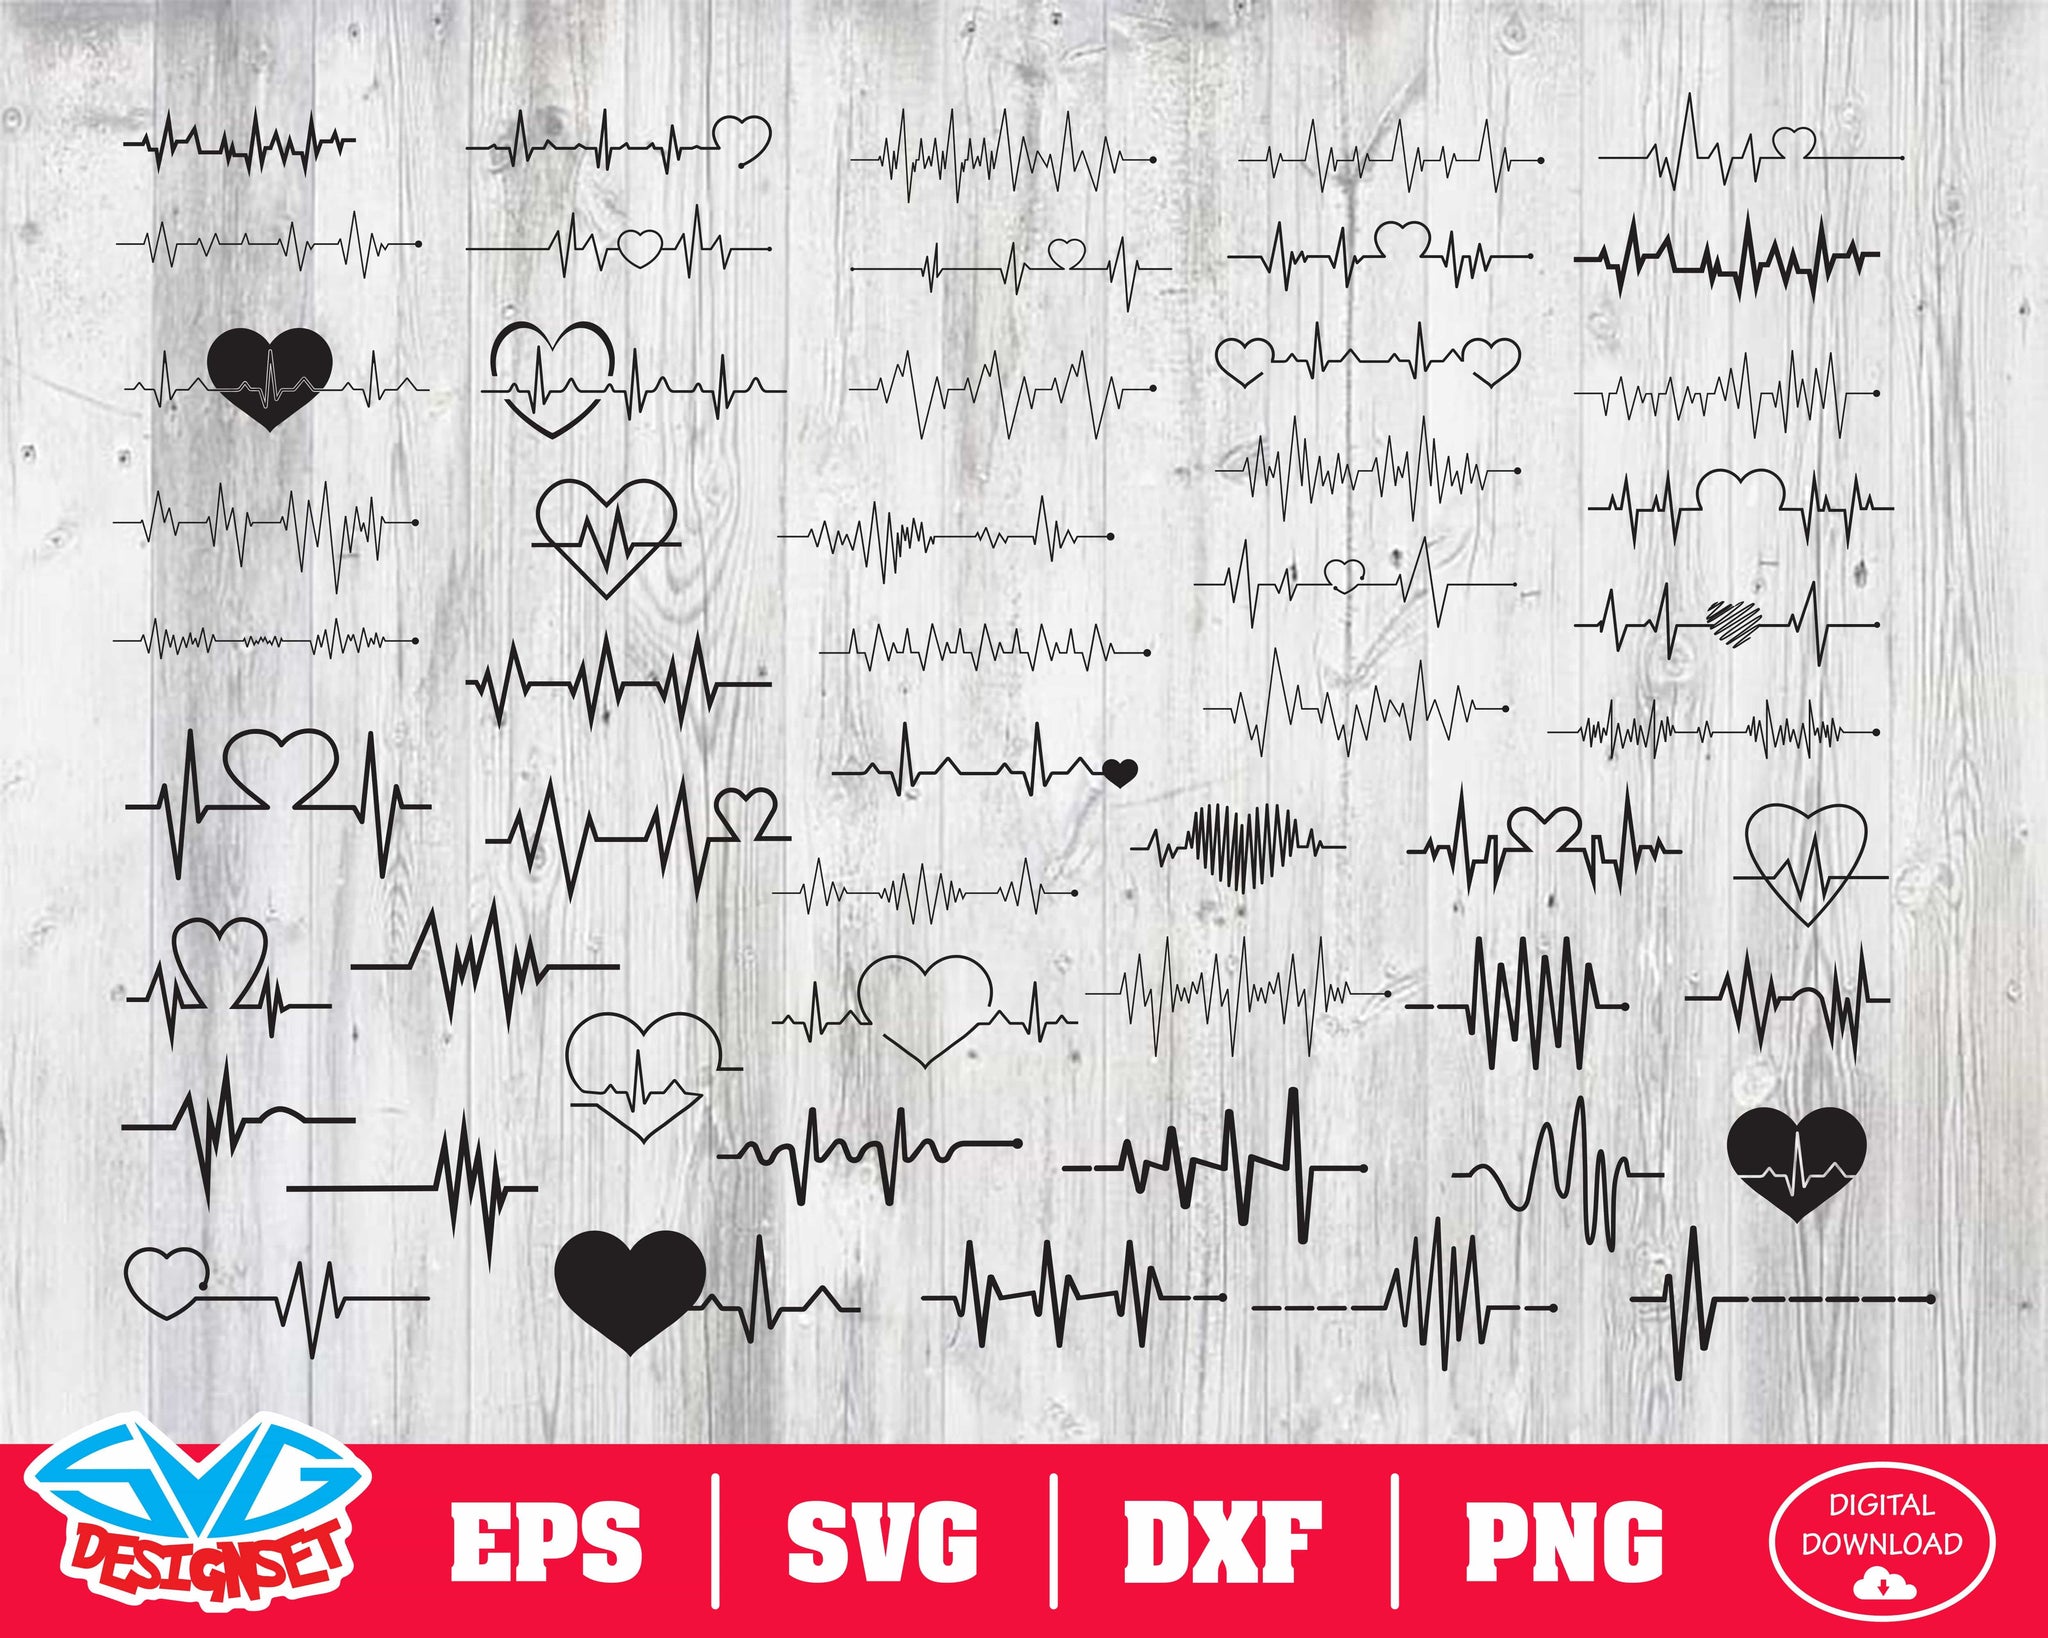 Heartbeat Svg, Dxf, Eps, Png, Clipart, Silhouette and Cutfiles #1 - SVGDesignSets